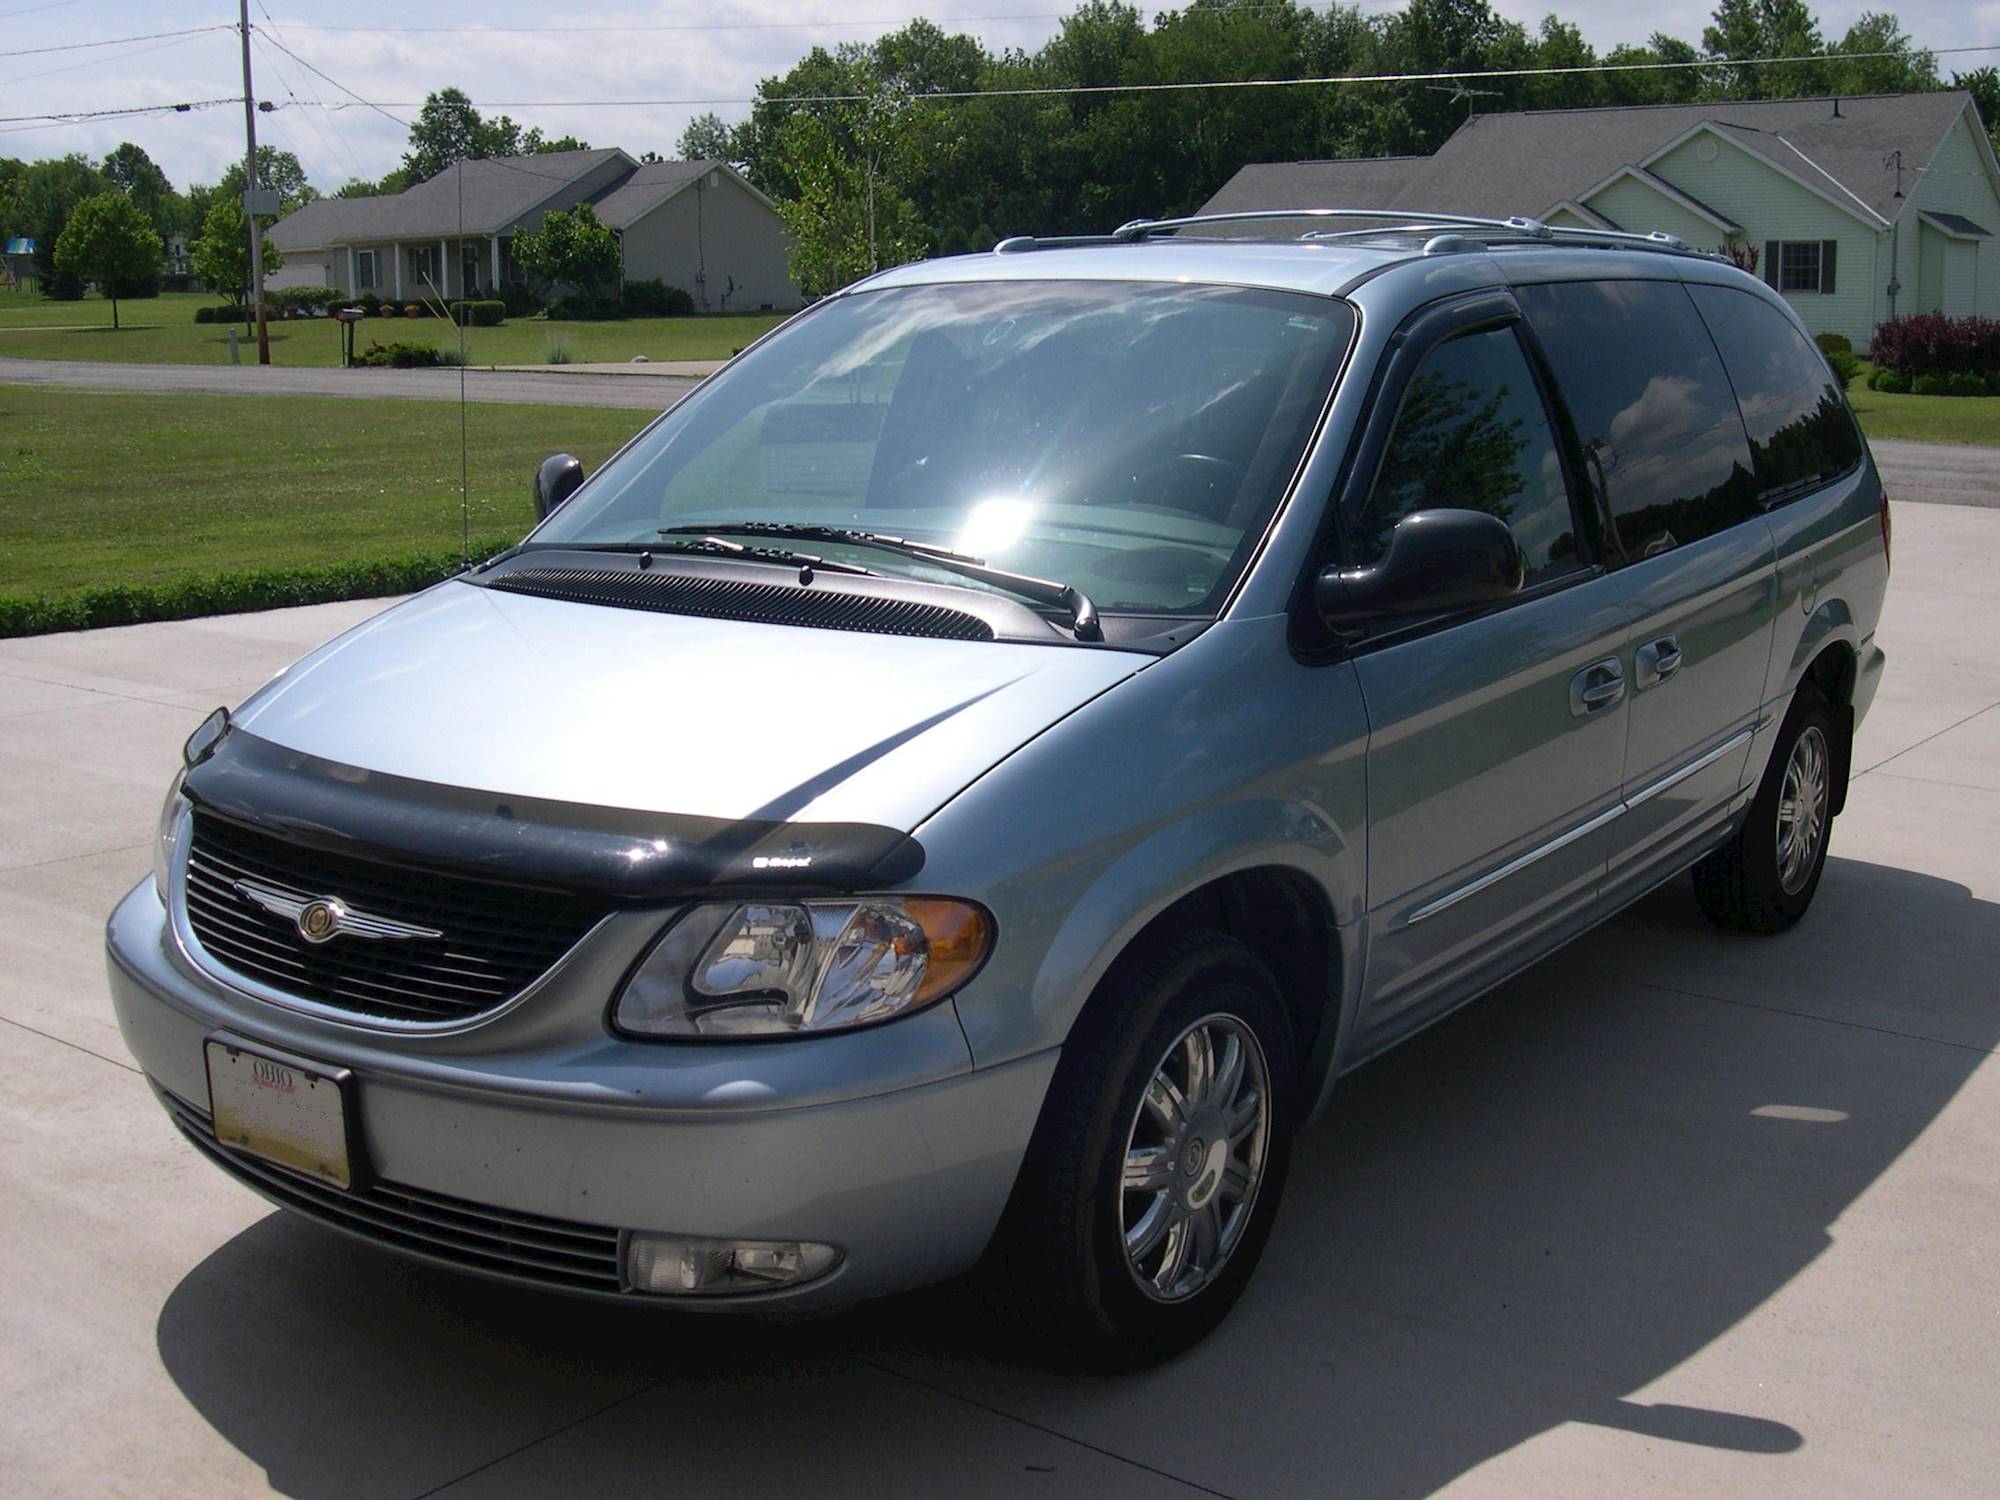 2004 Chrysler Town and Country Family Value - Passenger Minivan 3.3L V6 auto 2004 Chrysler Town And Country Tire Size